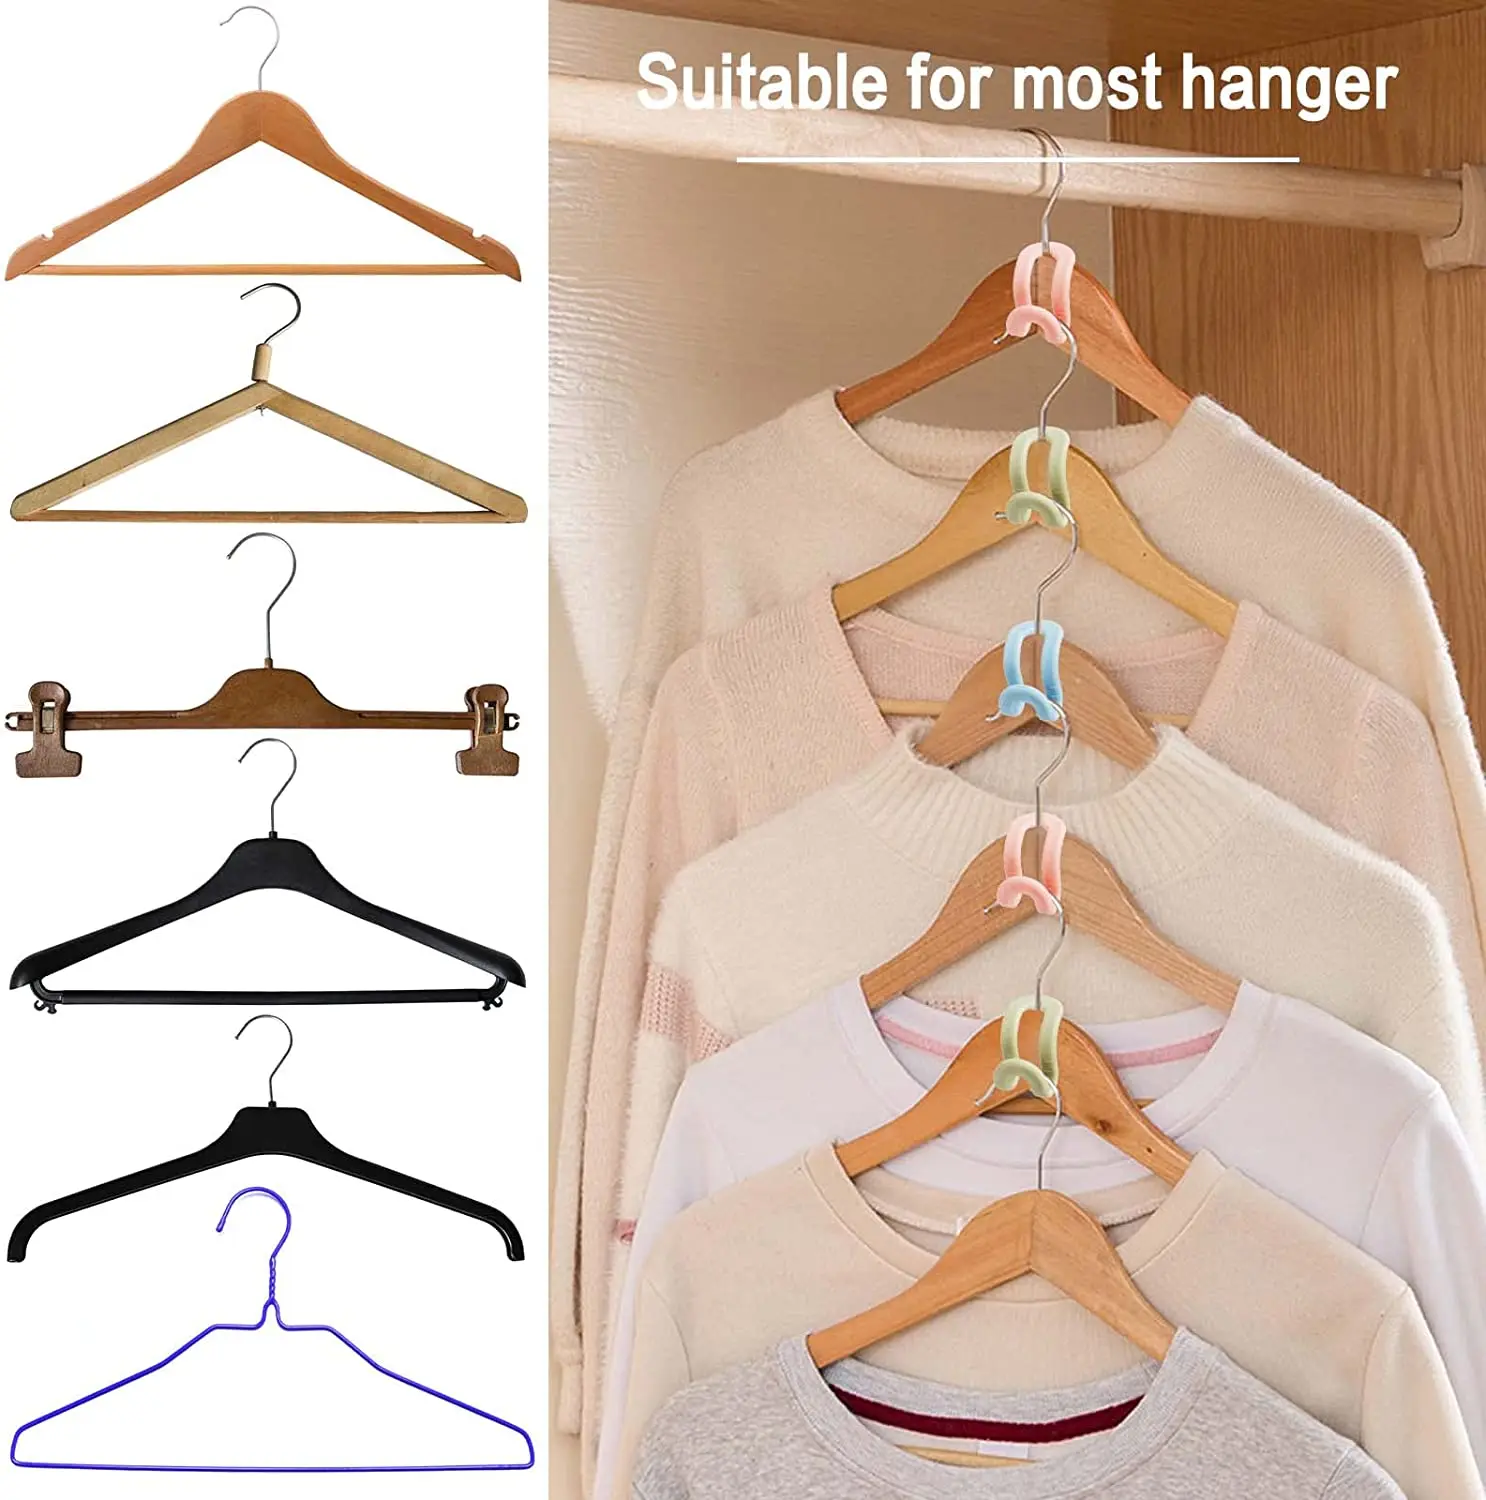 10pcs Triangle Shaped Clothes Hanger Connector Hooks Space Saving